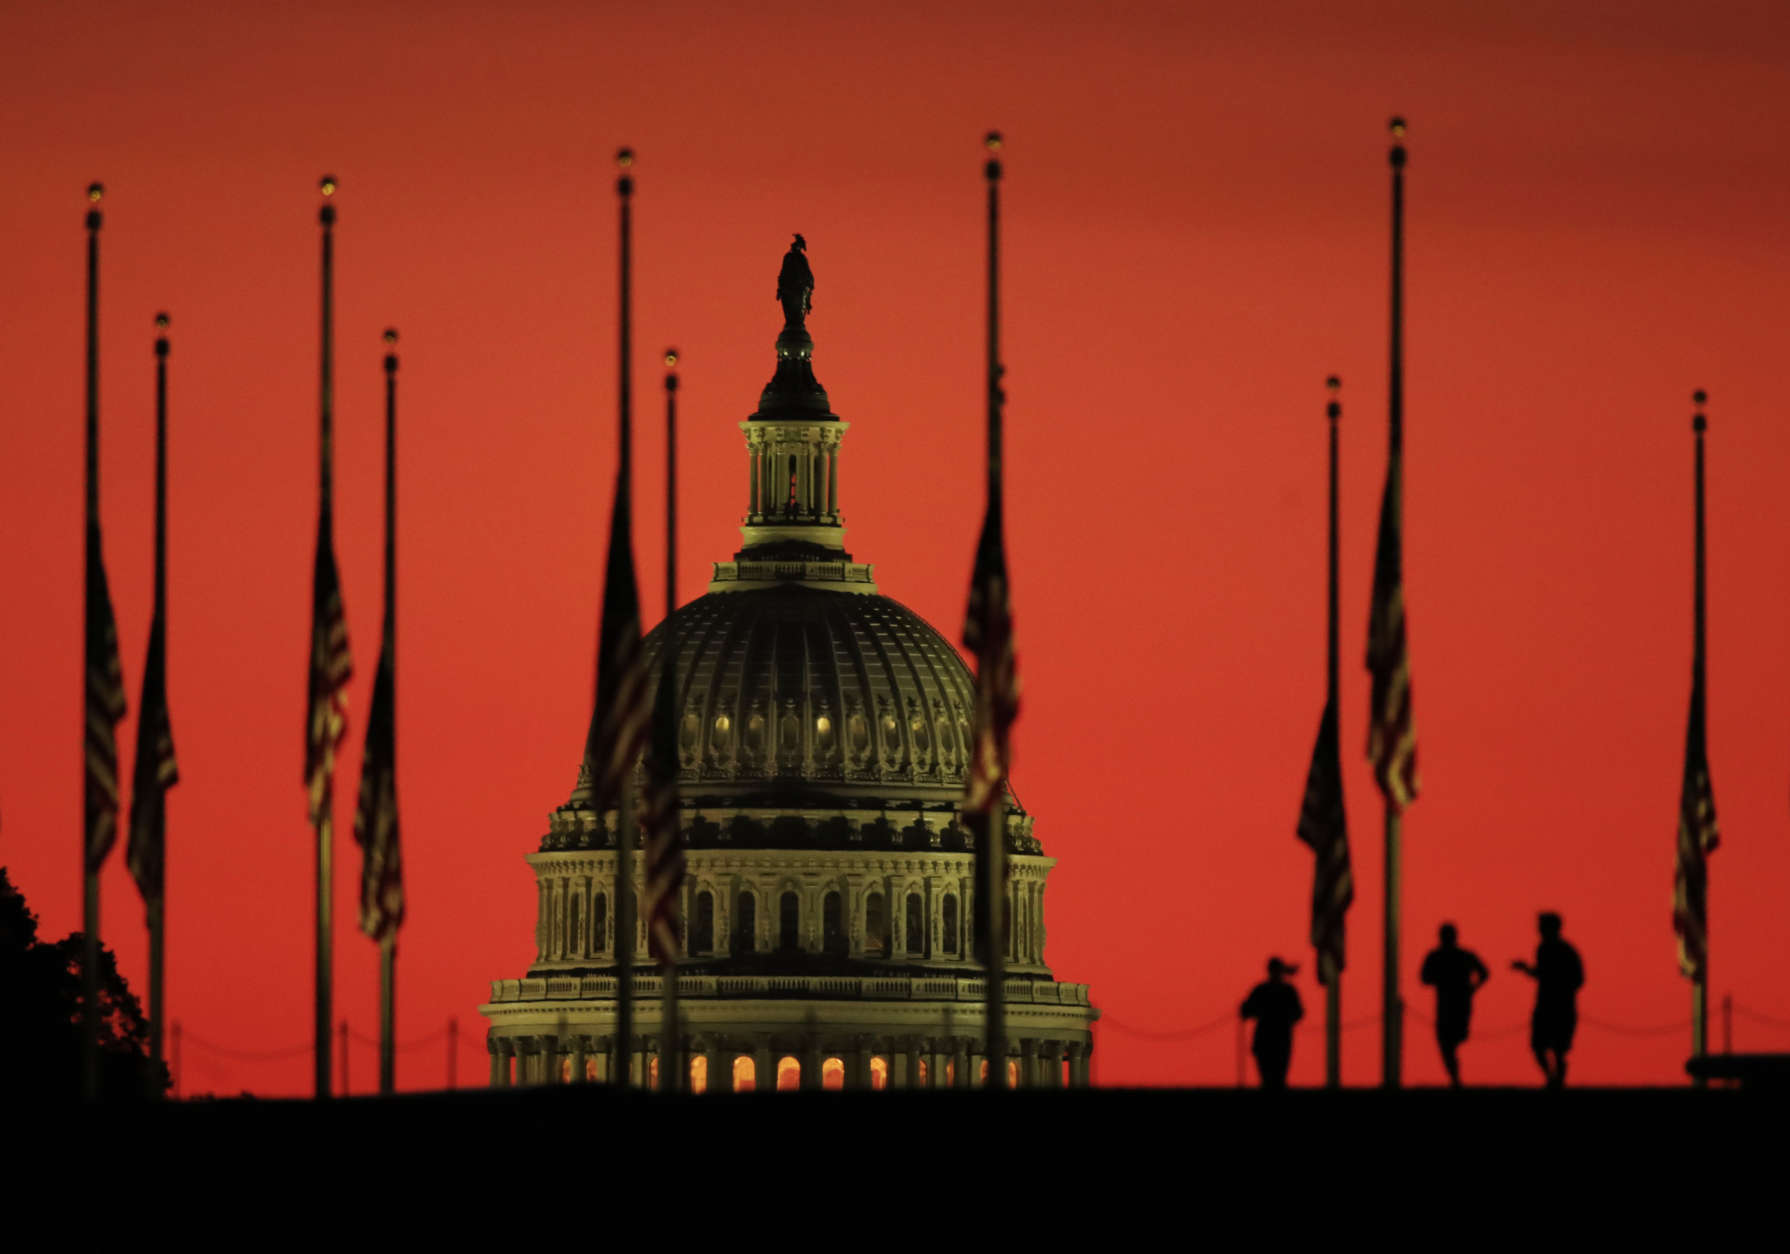 The U.S. Capitol dome backdrops flags at half-staff in honor of the victims killed in the Las Vegas shooting as the sun rises on Tuesday, Oct. 3, 2017, at the foot of the Washington Monument on the National Mall in Washington. (AP Photo/Manuel Balce Ceneta)